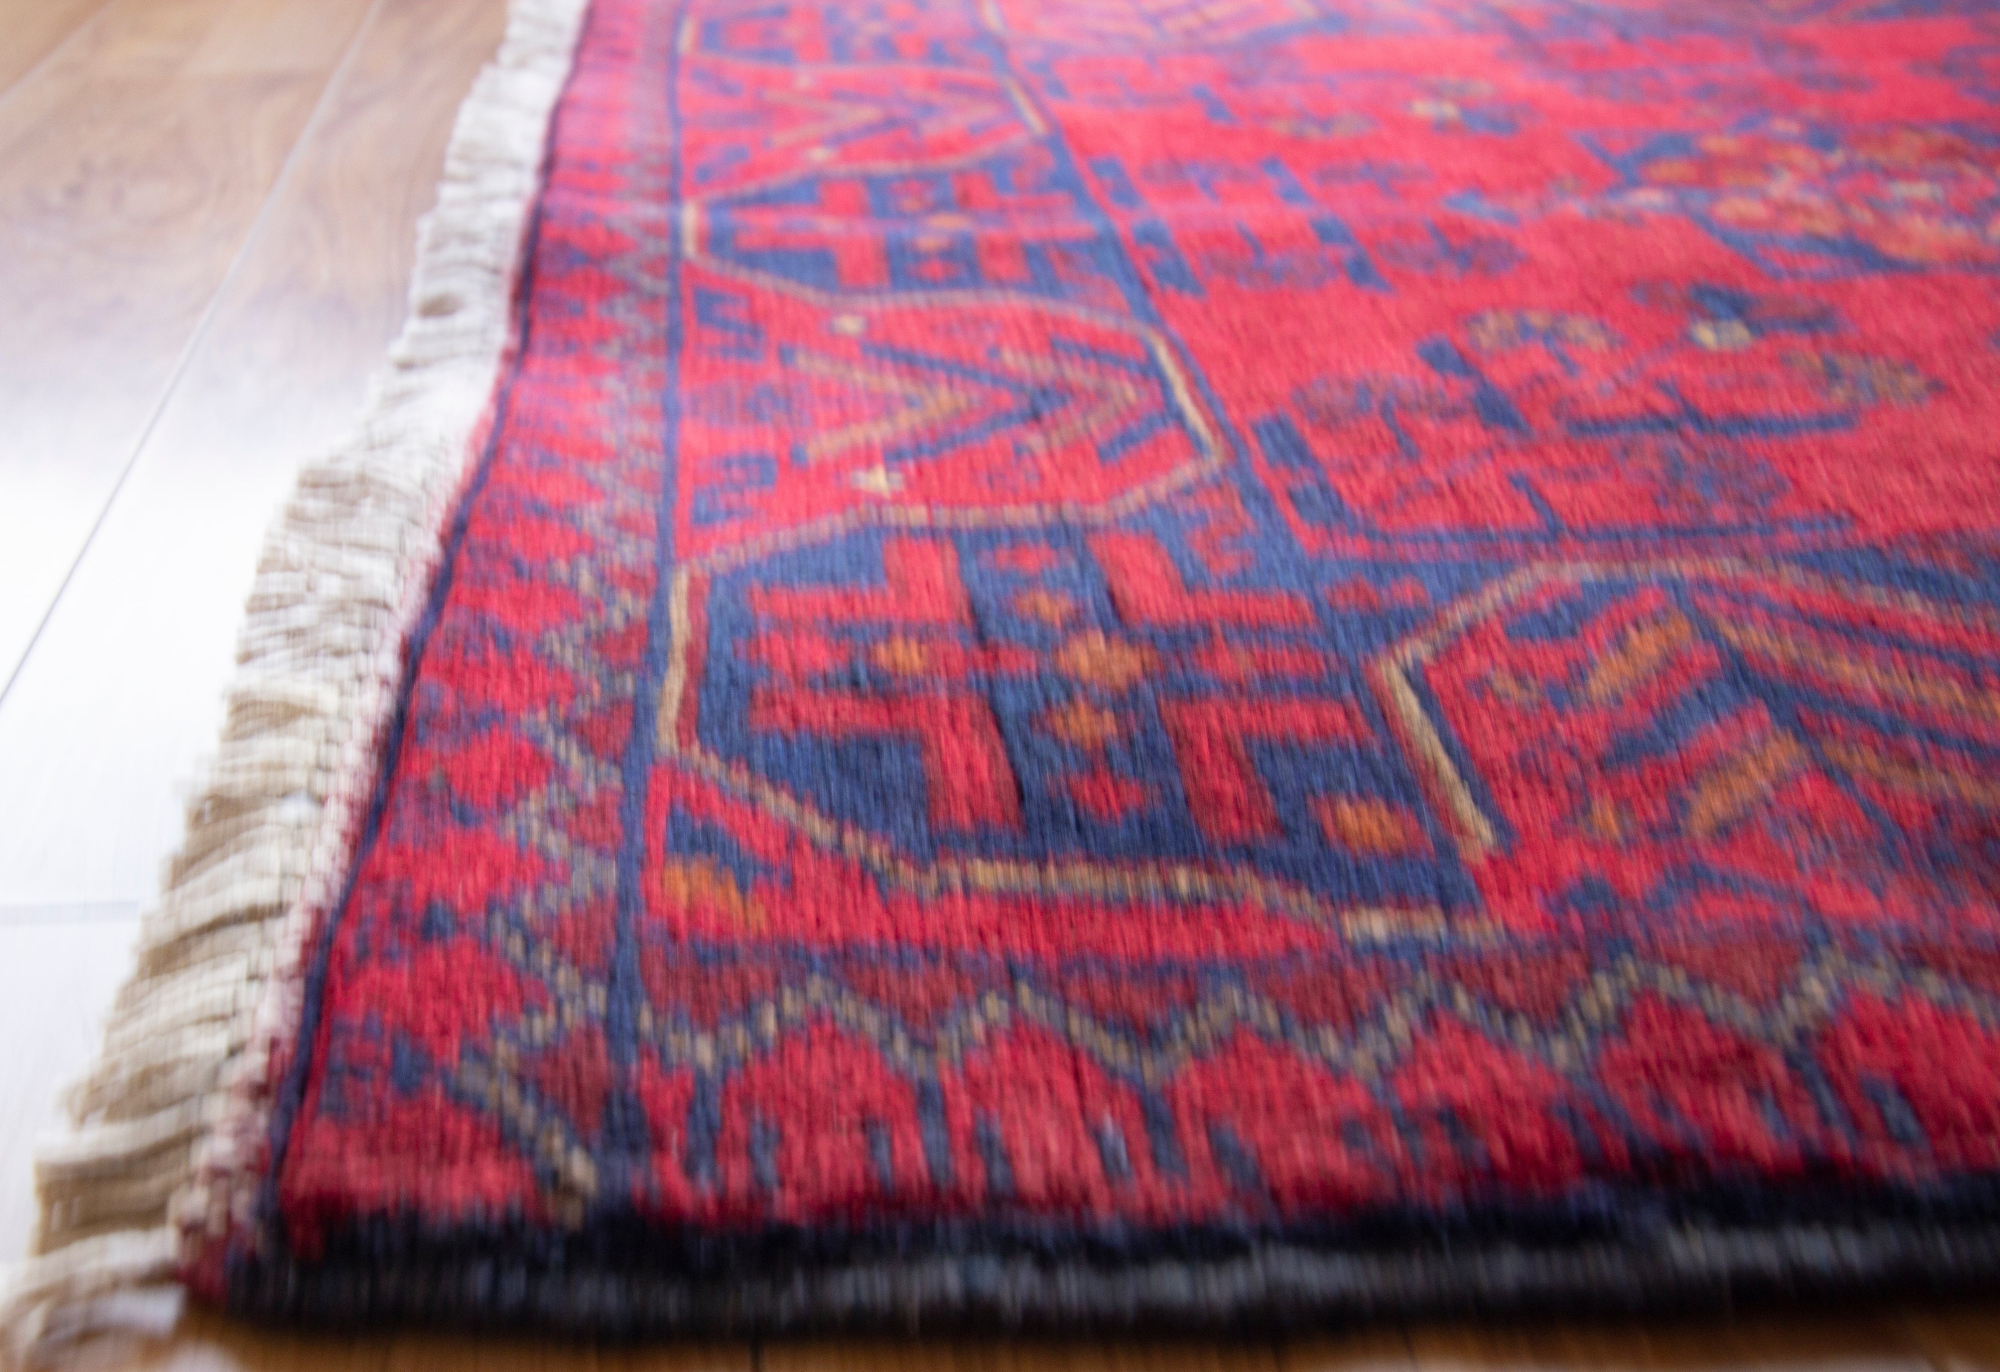 Khal Mohammadi Hand Knotted Rug 2'7